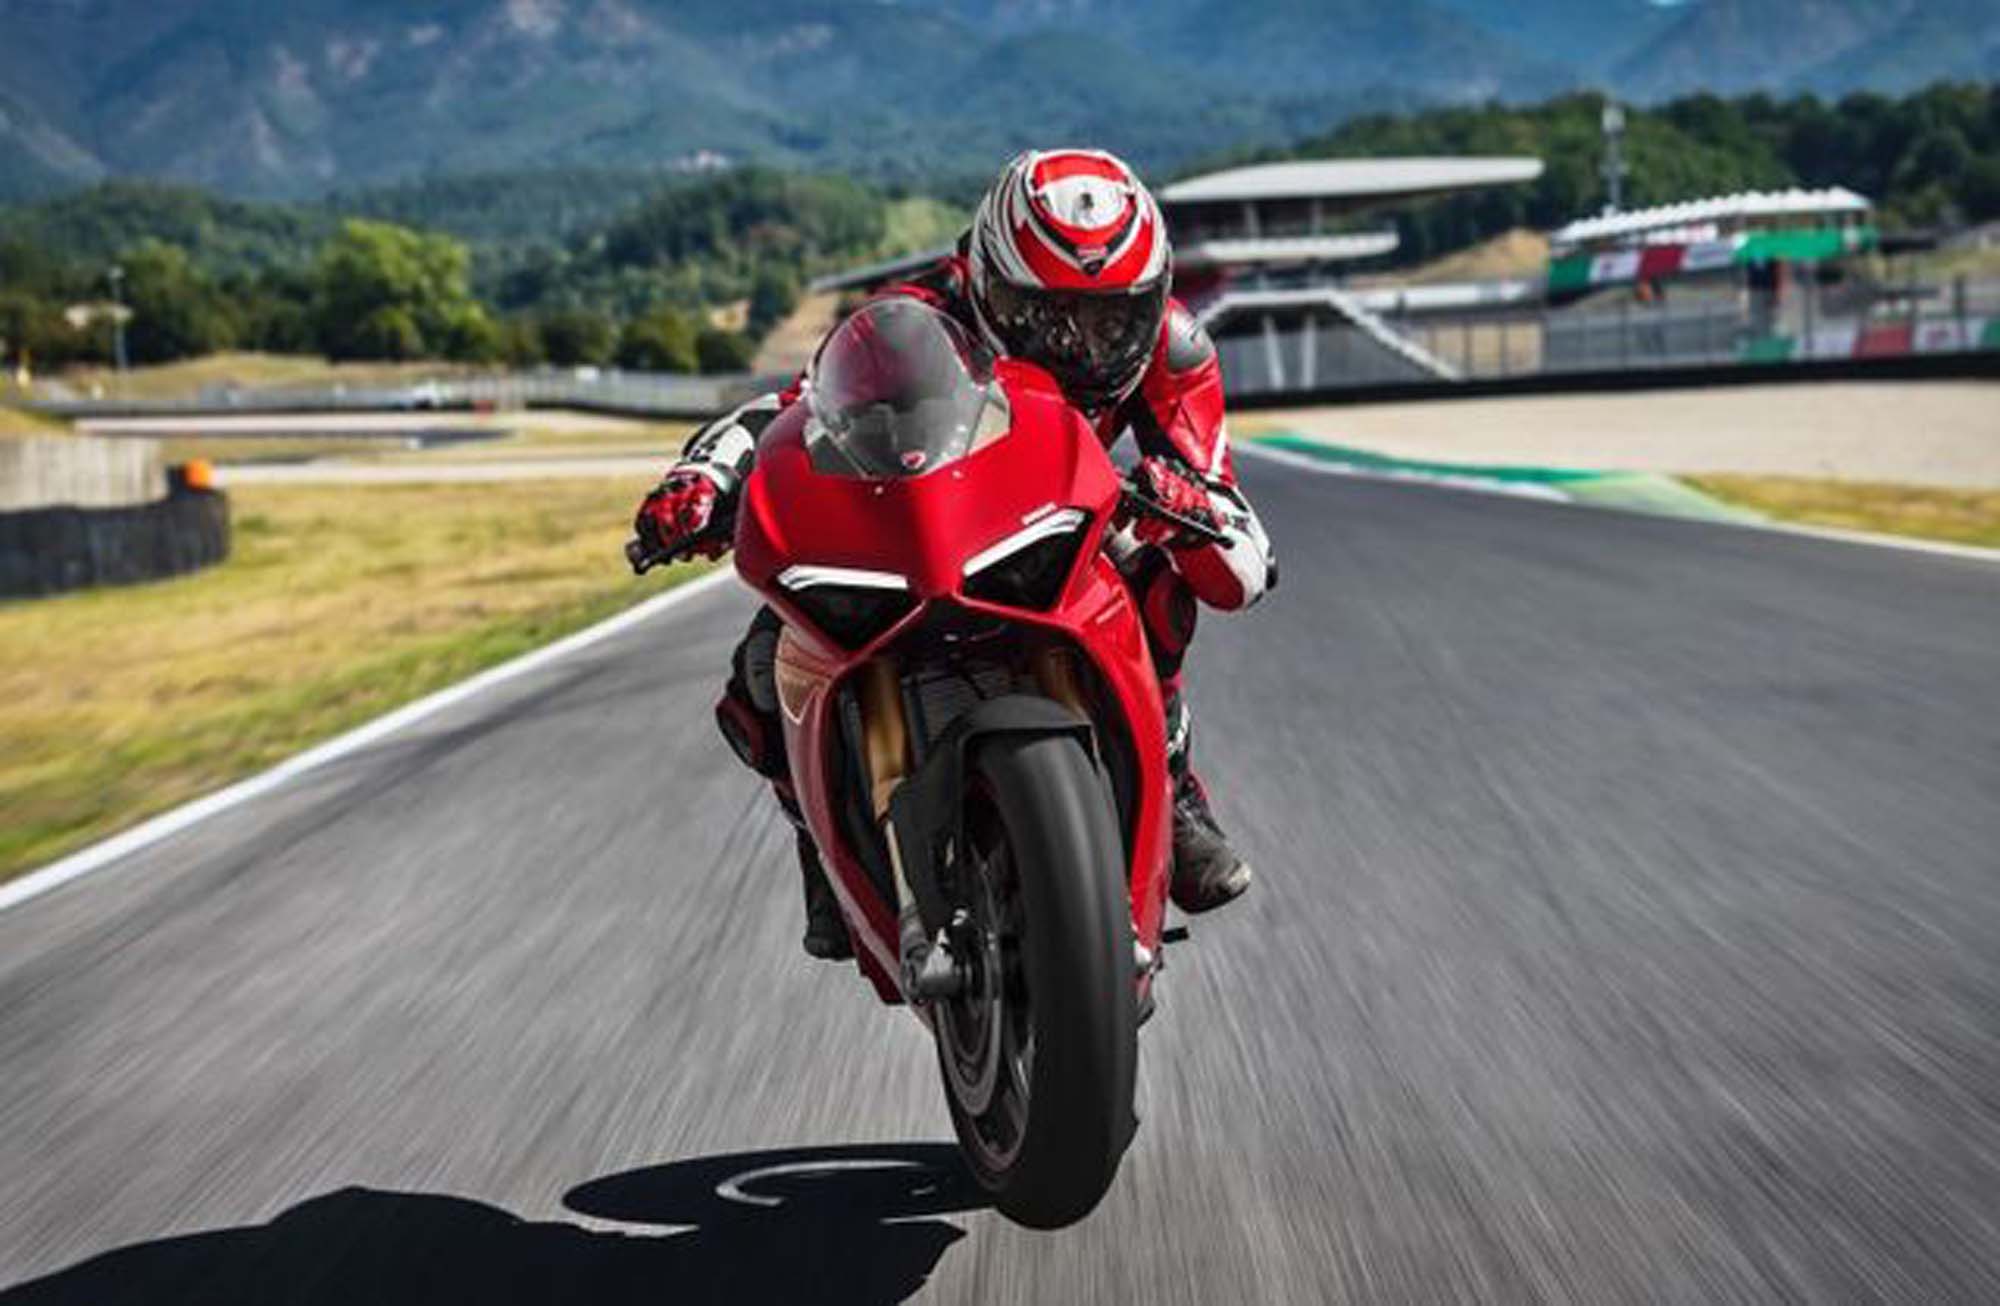 The Rise of the Ducati Panigale: A Revolution in Superbike Design